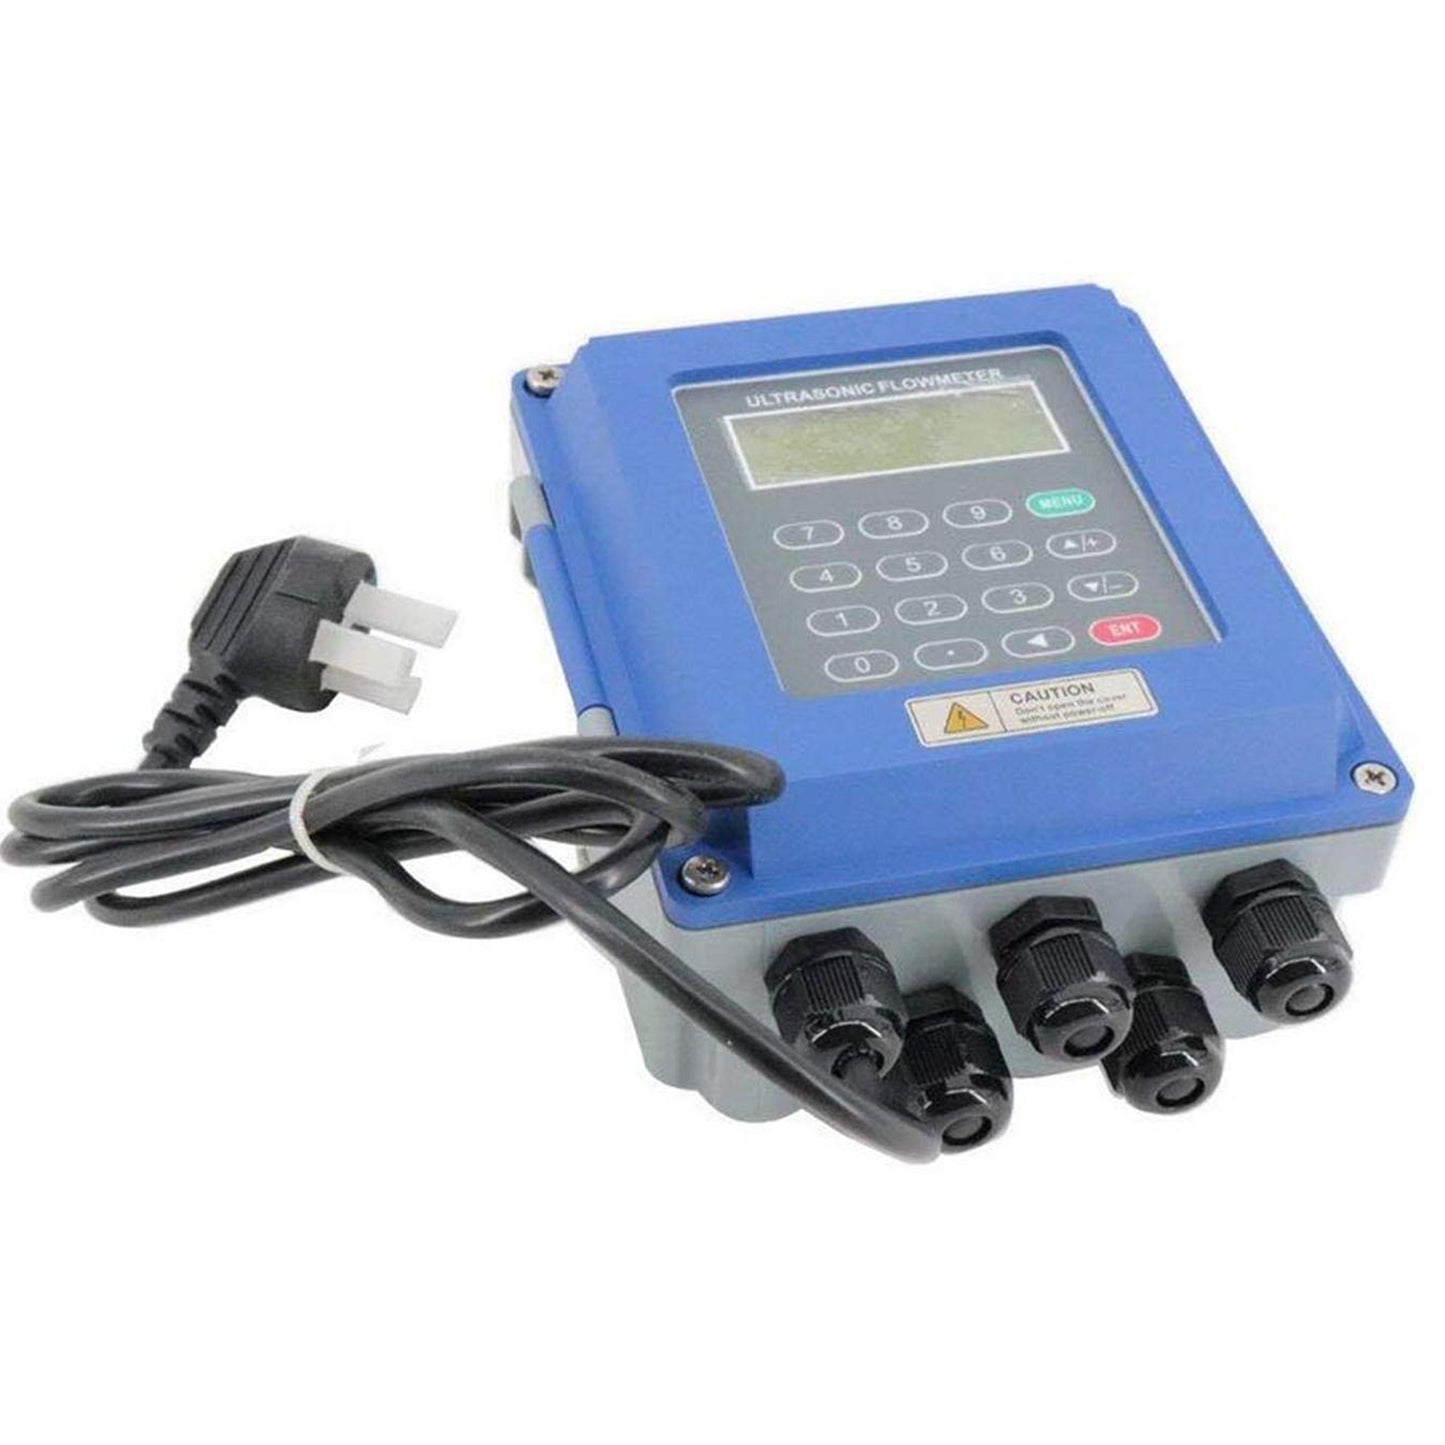 VTSYIQI Ultrasonic Flow Meter Liquid Flowmeter With DN300mm to DN6000mm Wall Mounted Type RS485 Interface IP67 Protection TL-1 Transducer